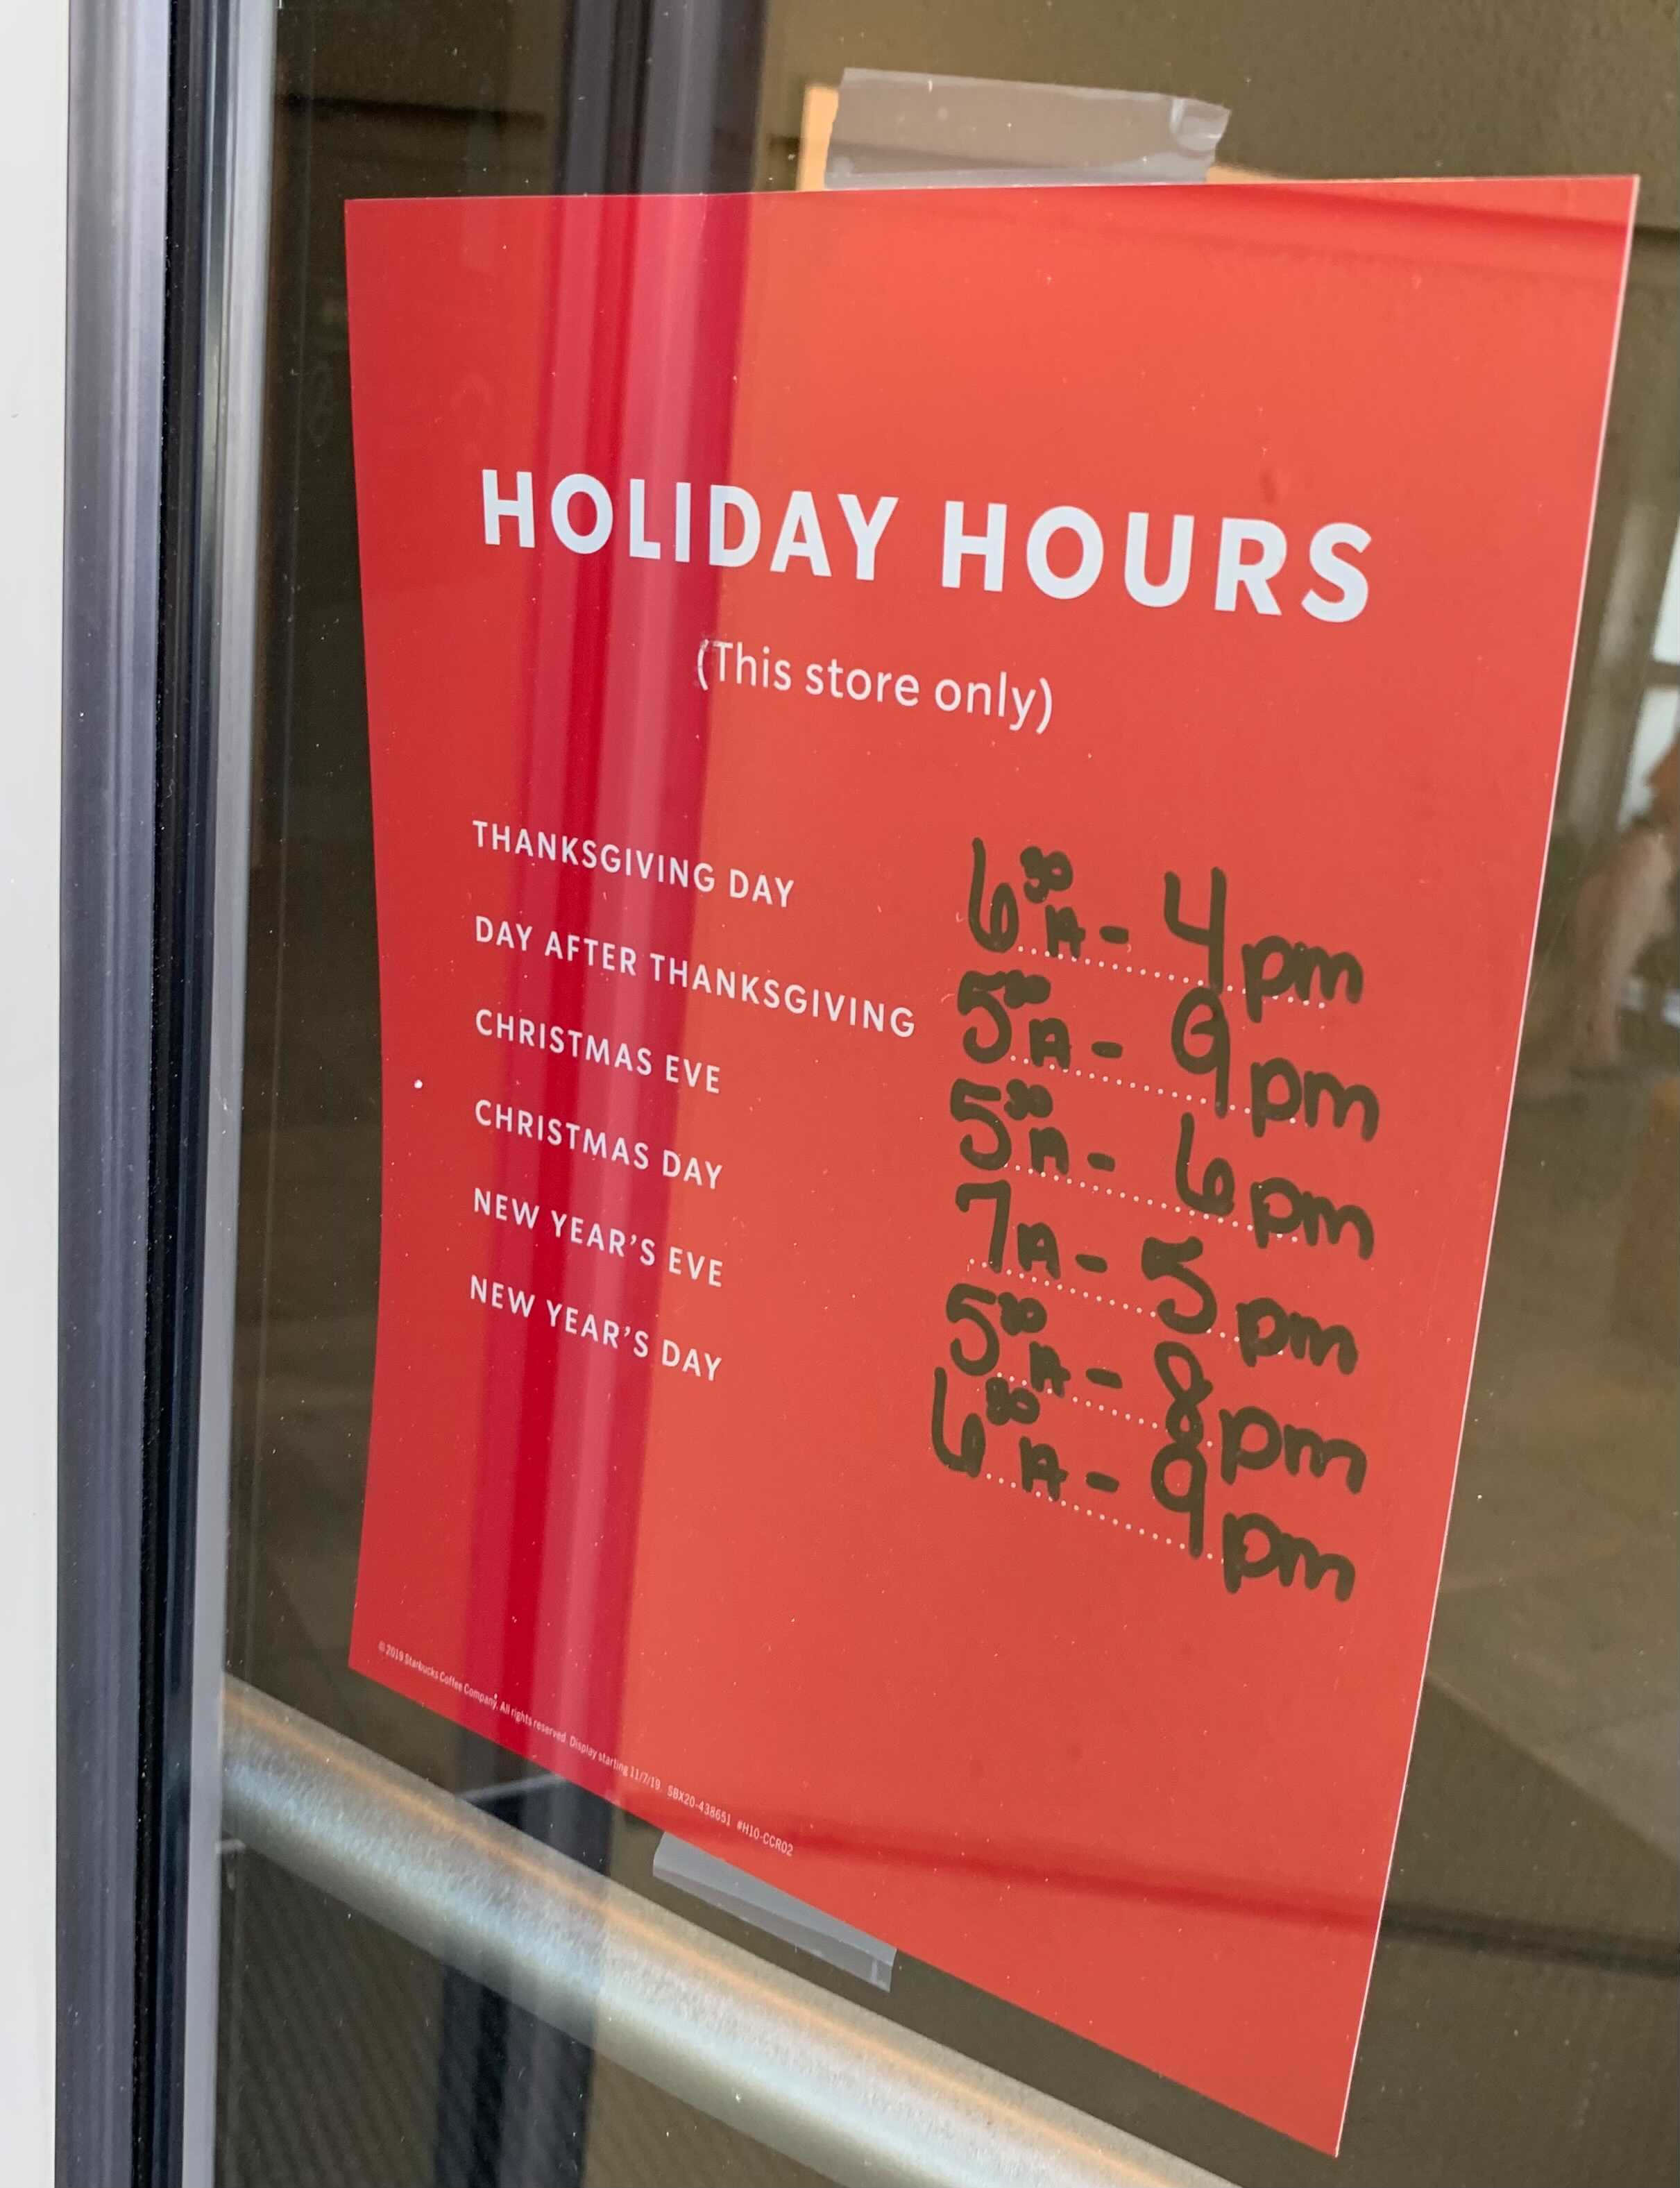 Starbucks: What their Eve hours 2021?